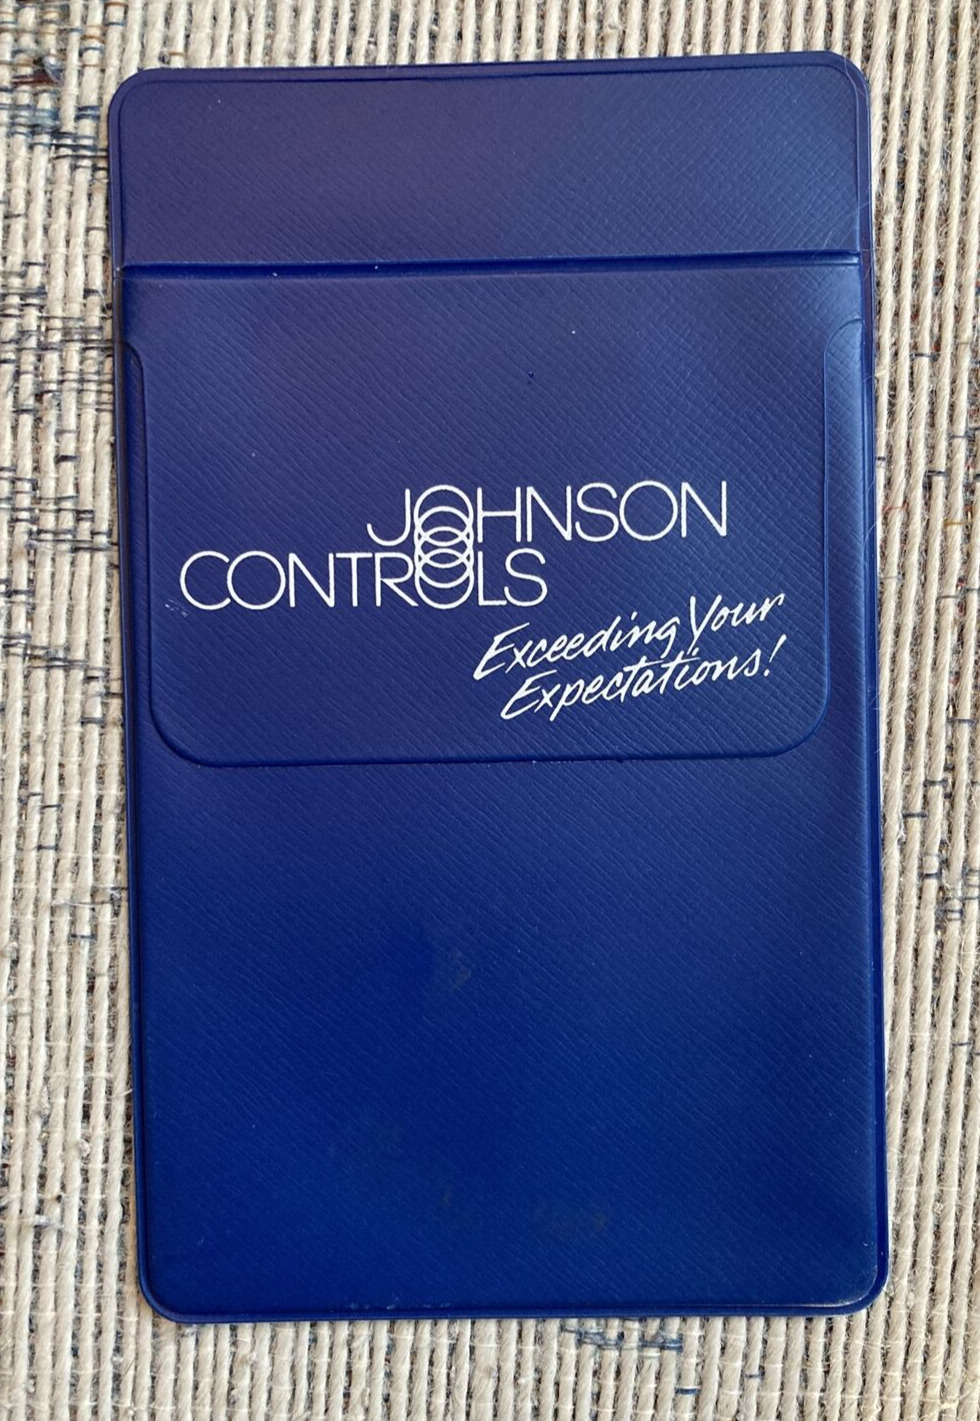 VINTAGE Johnson Controls old logo POCKET PROTECTOR *PRE-OWNED* but never used